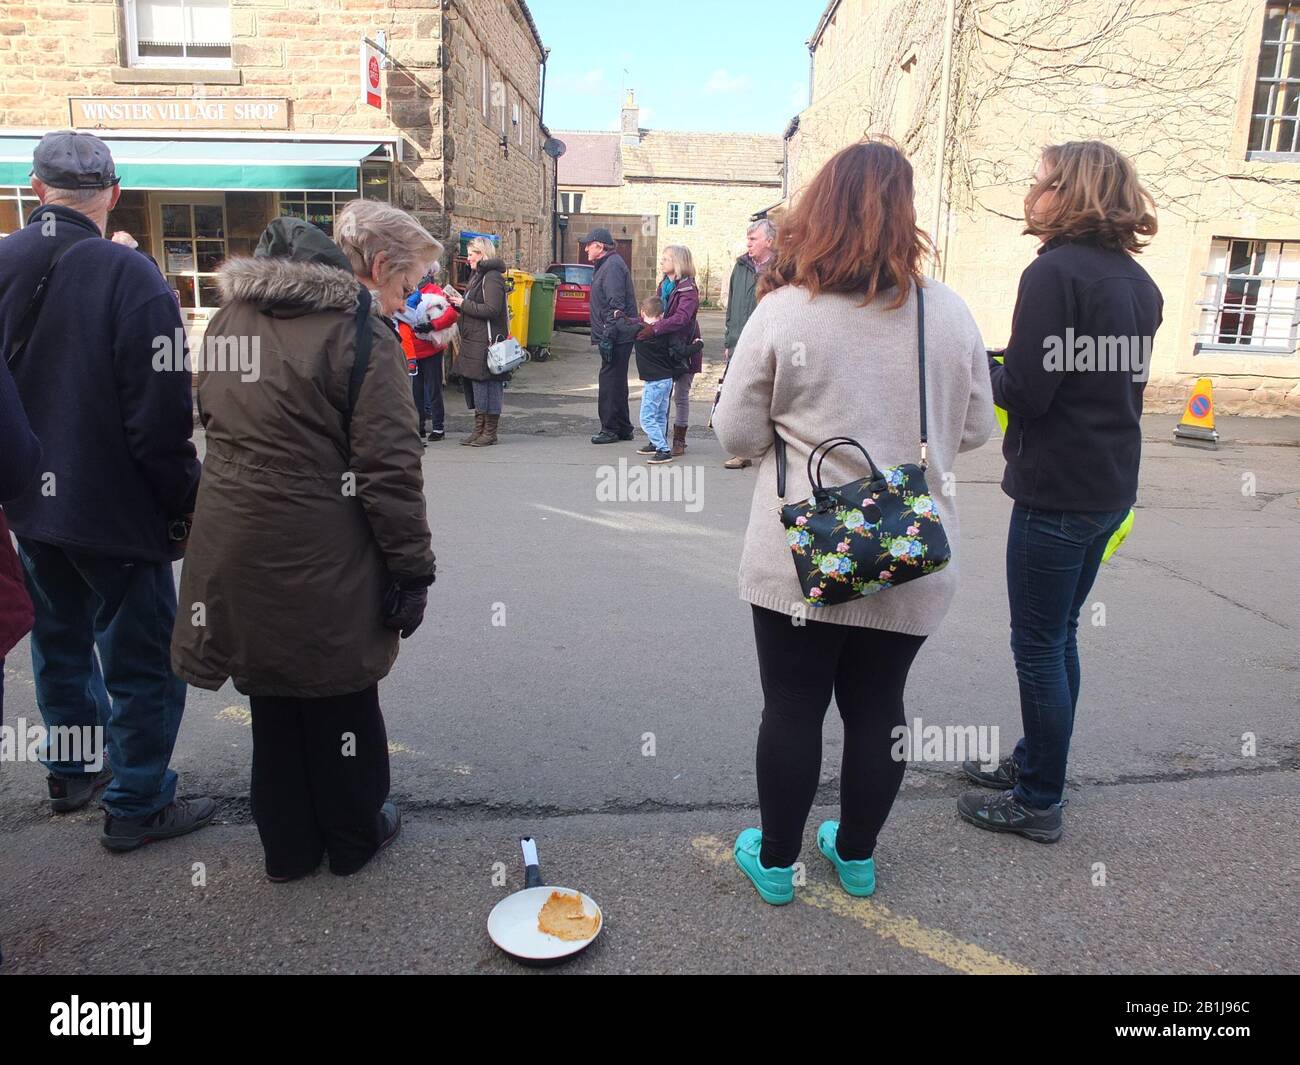 Spectators on village Main Street during Winster Pancake Races lady looks at abandoned frying pan on floor Shrove Tuesday Pancake Day Derbyshire Stock Photo